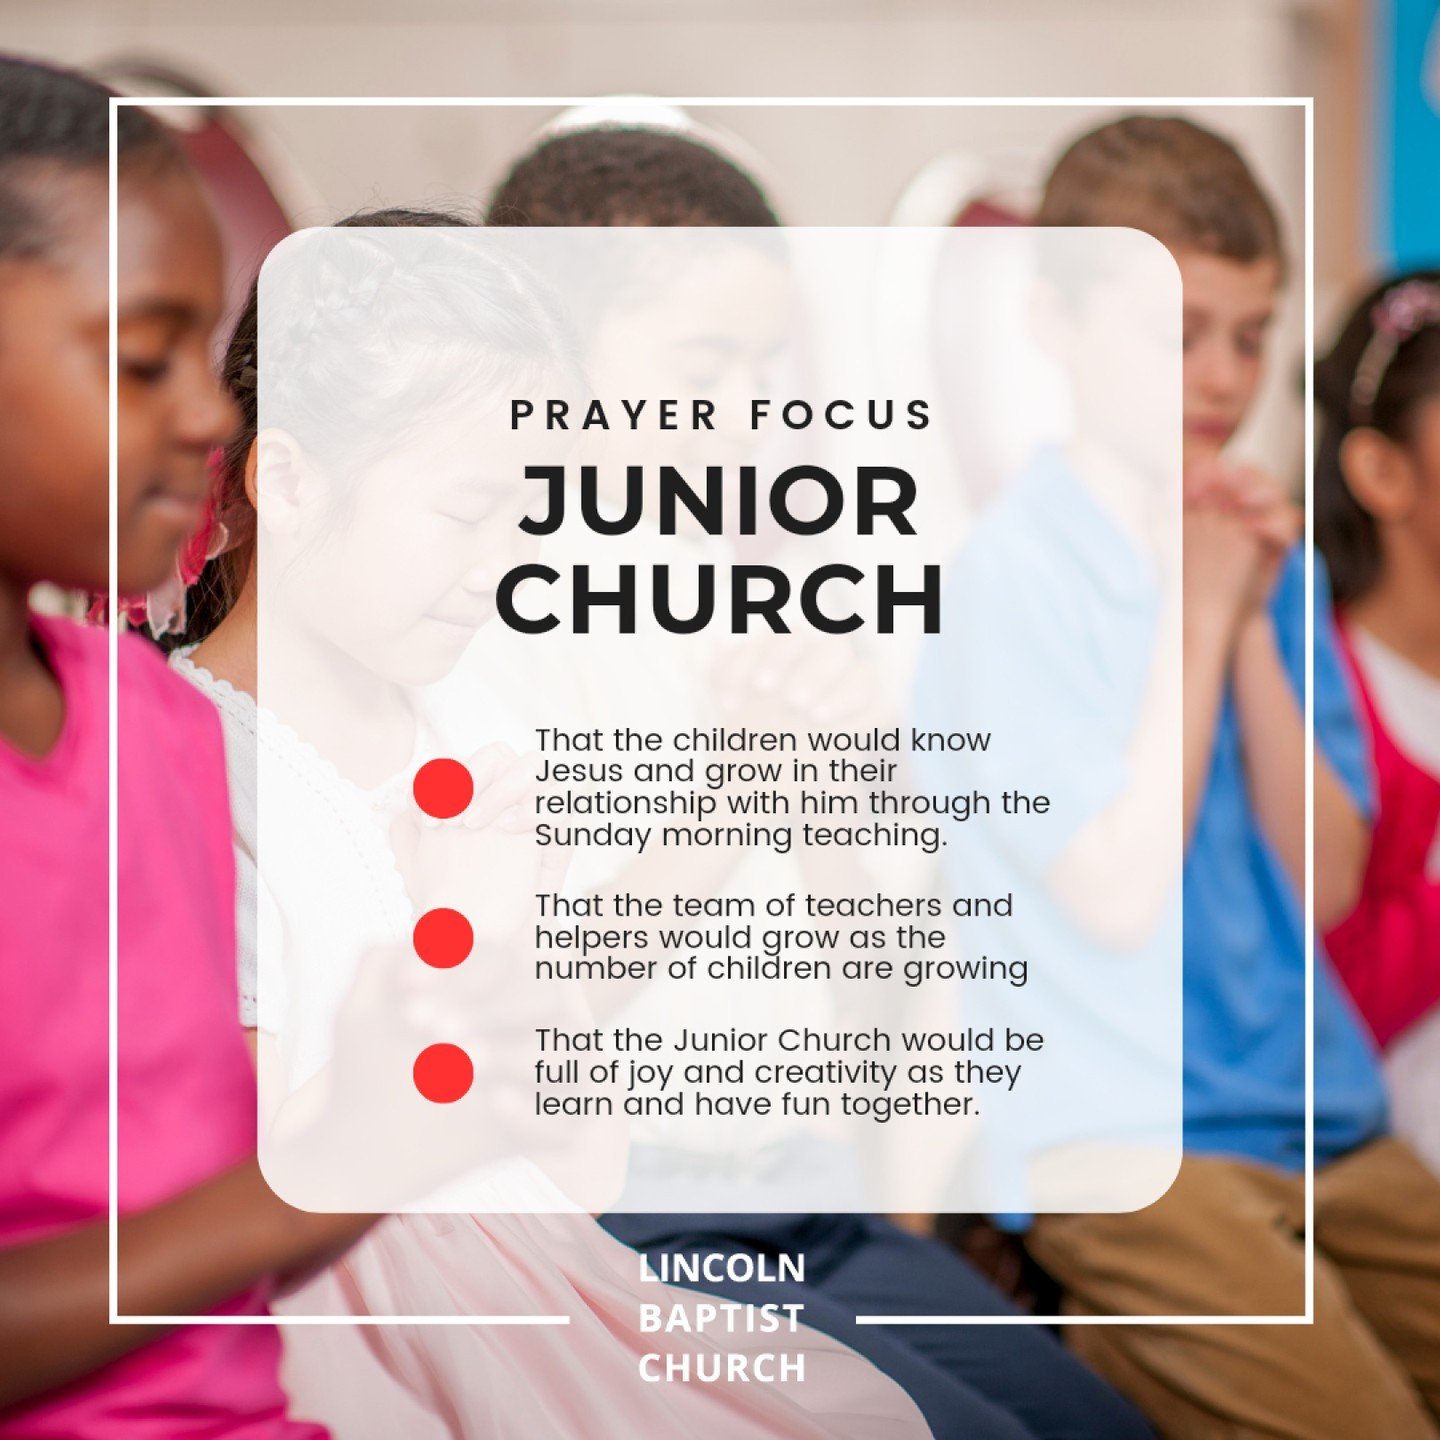 This week please keep our Junior Church children, teachers, and helpers in your prayers. Here are a few things to focus around.

#LBC #LincolnBaptistChurch #PrayerFocus